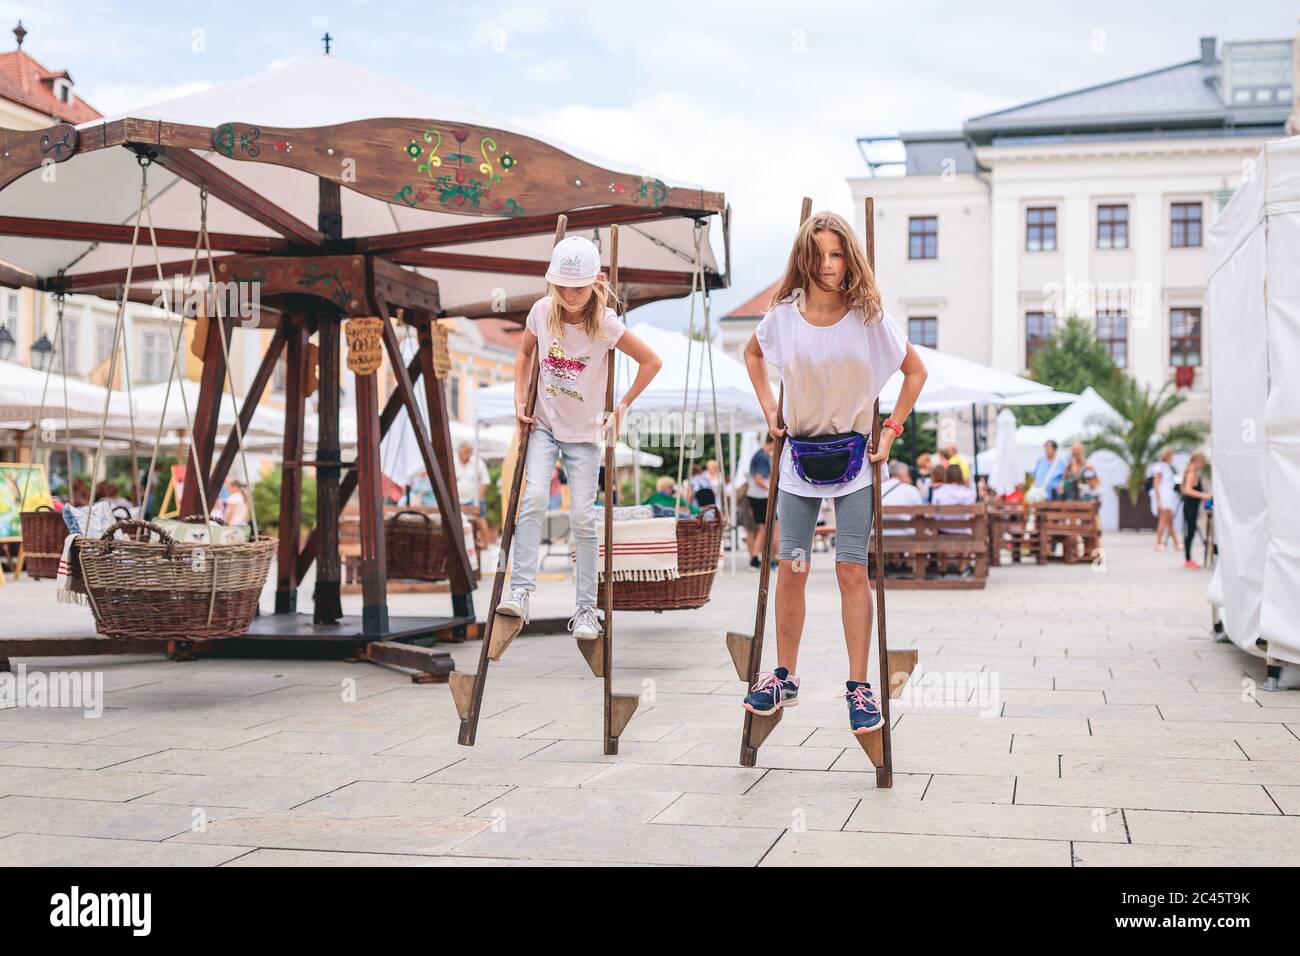 Two young girls walking on stelts during city festival, village fair Stock Photo